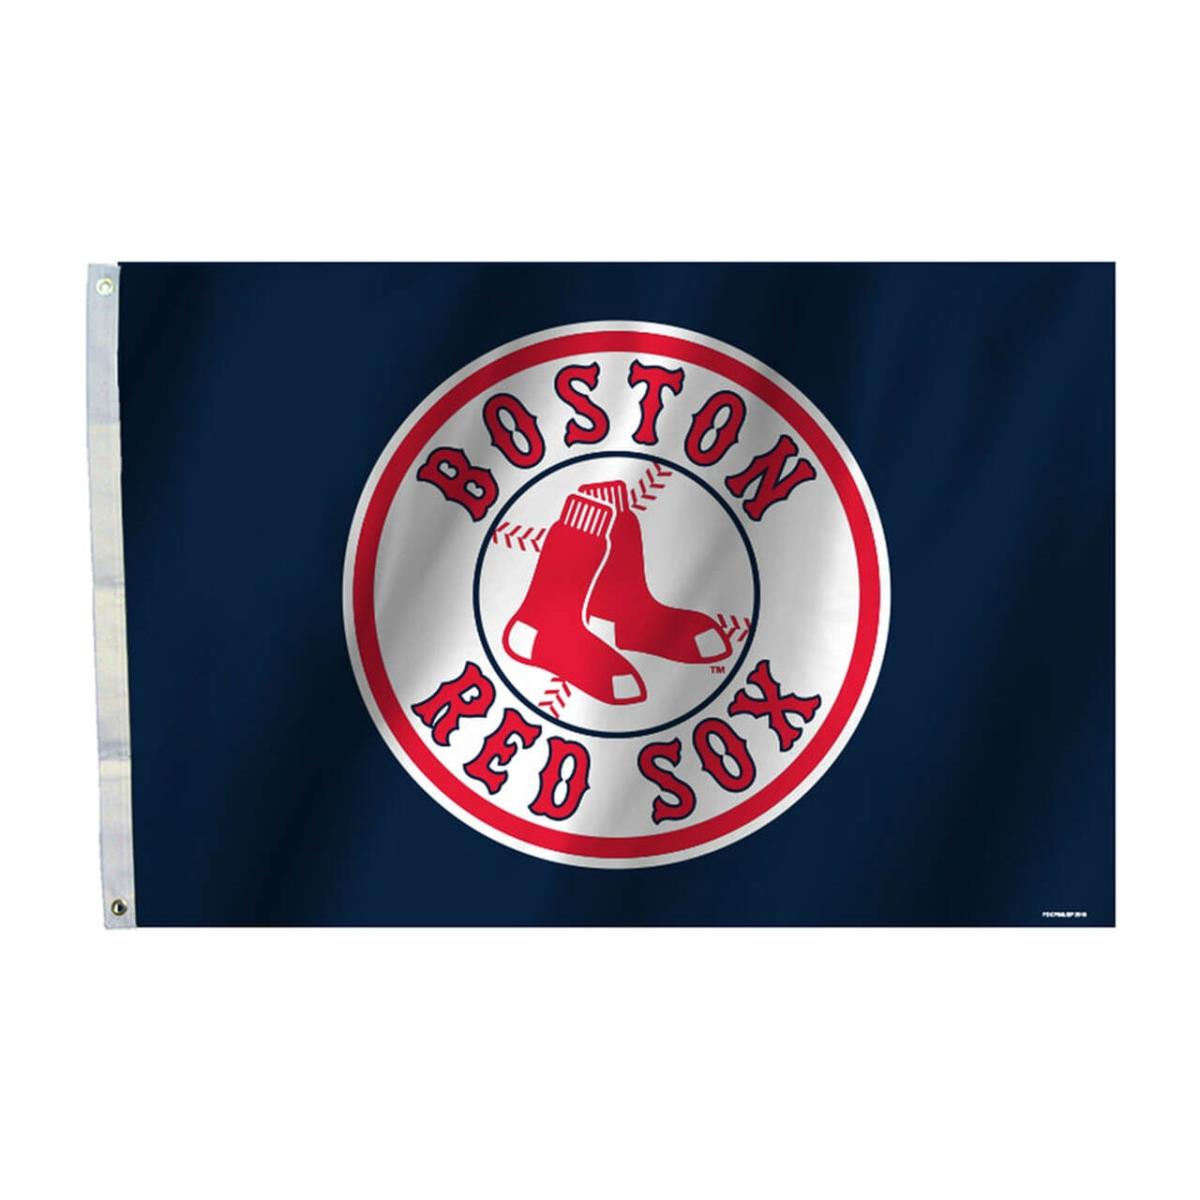 Picture of Fremont Die 2324562002 2 x 3 ft. Boston Red Sox Flag